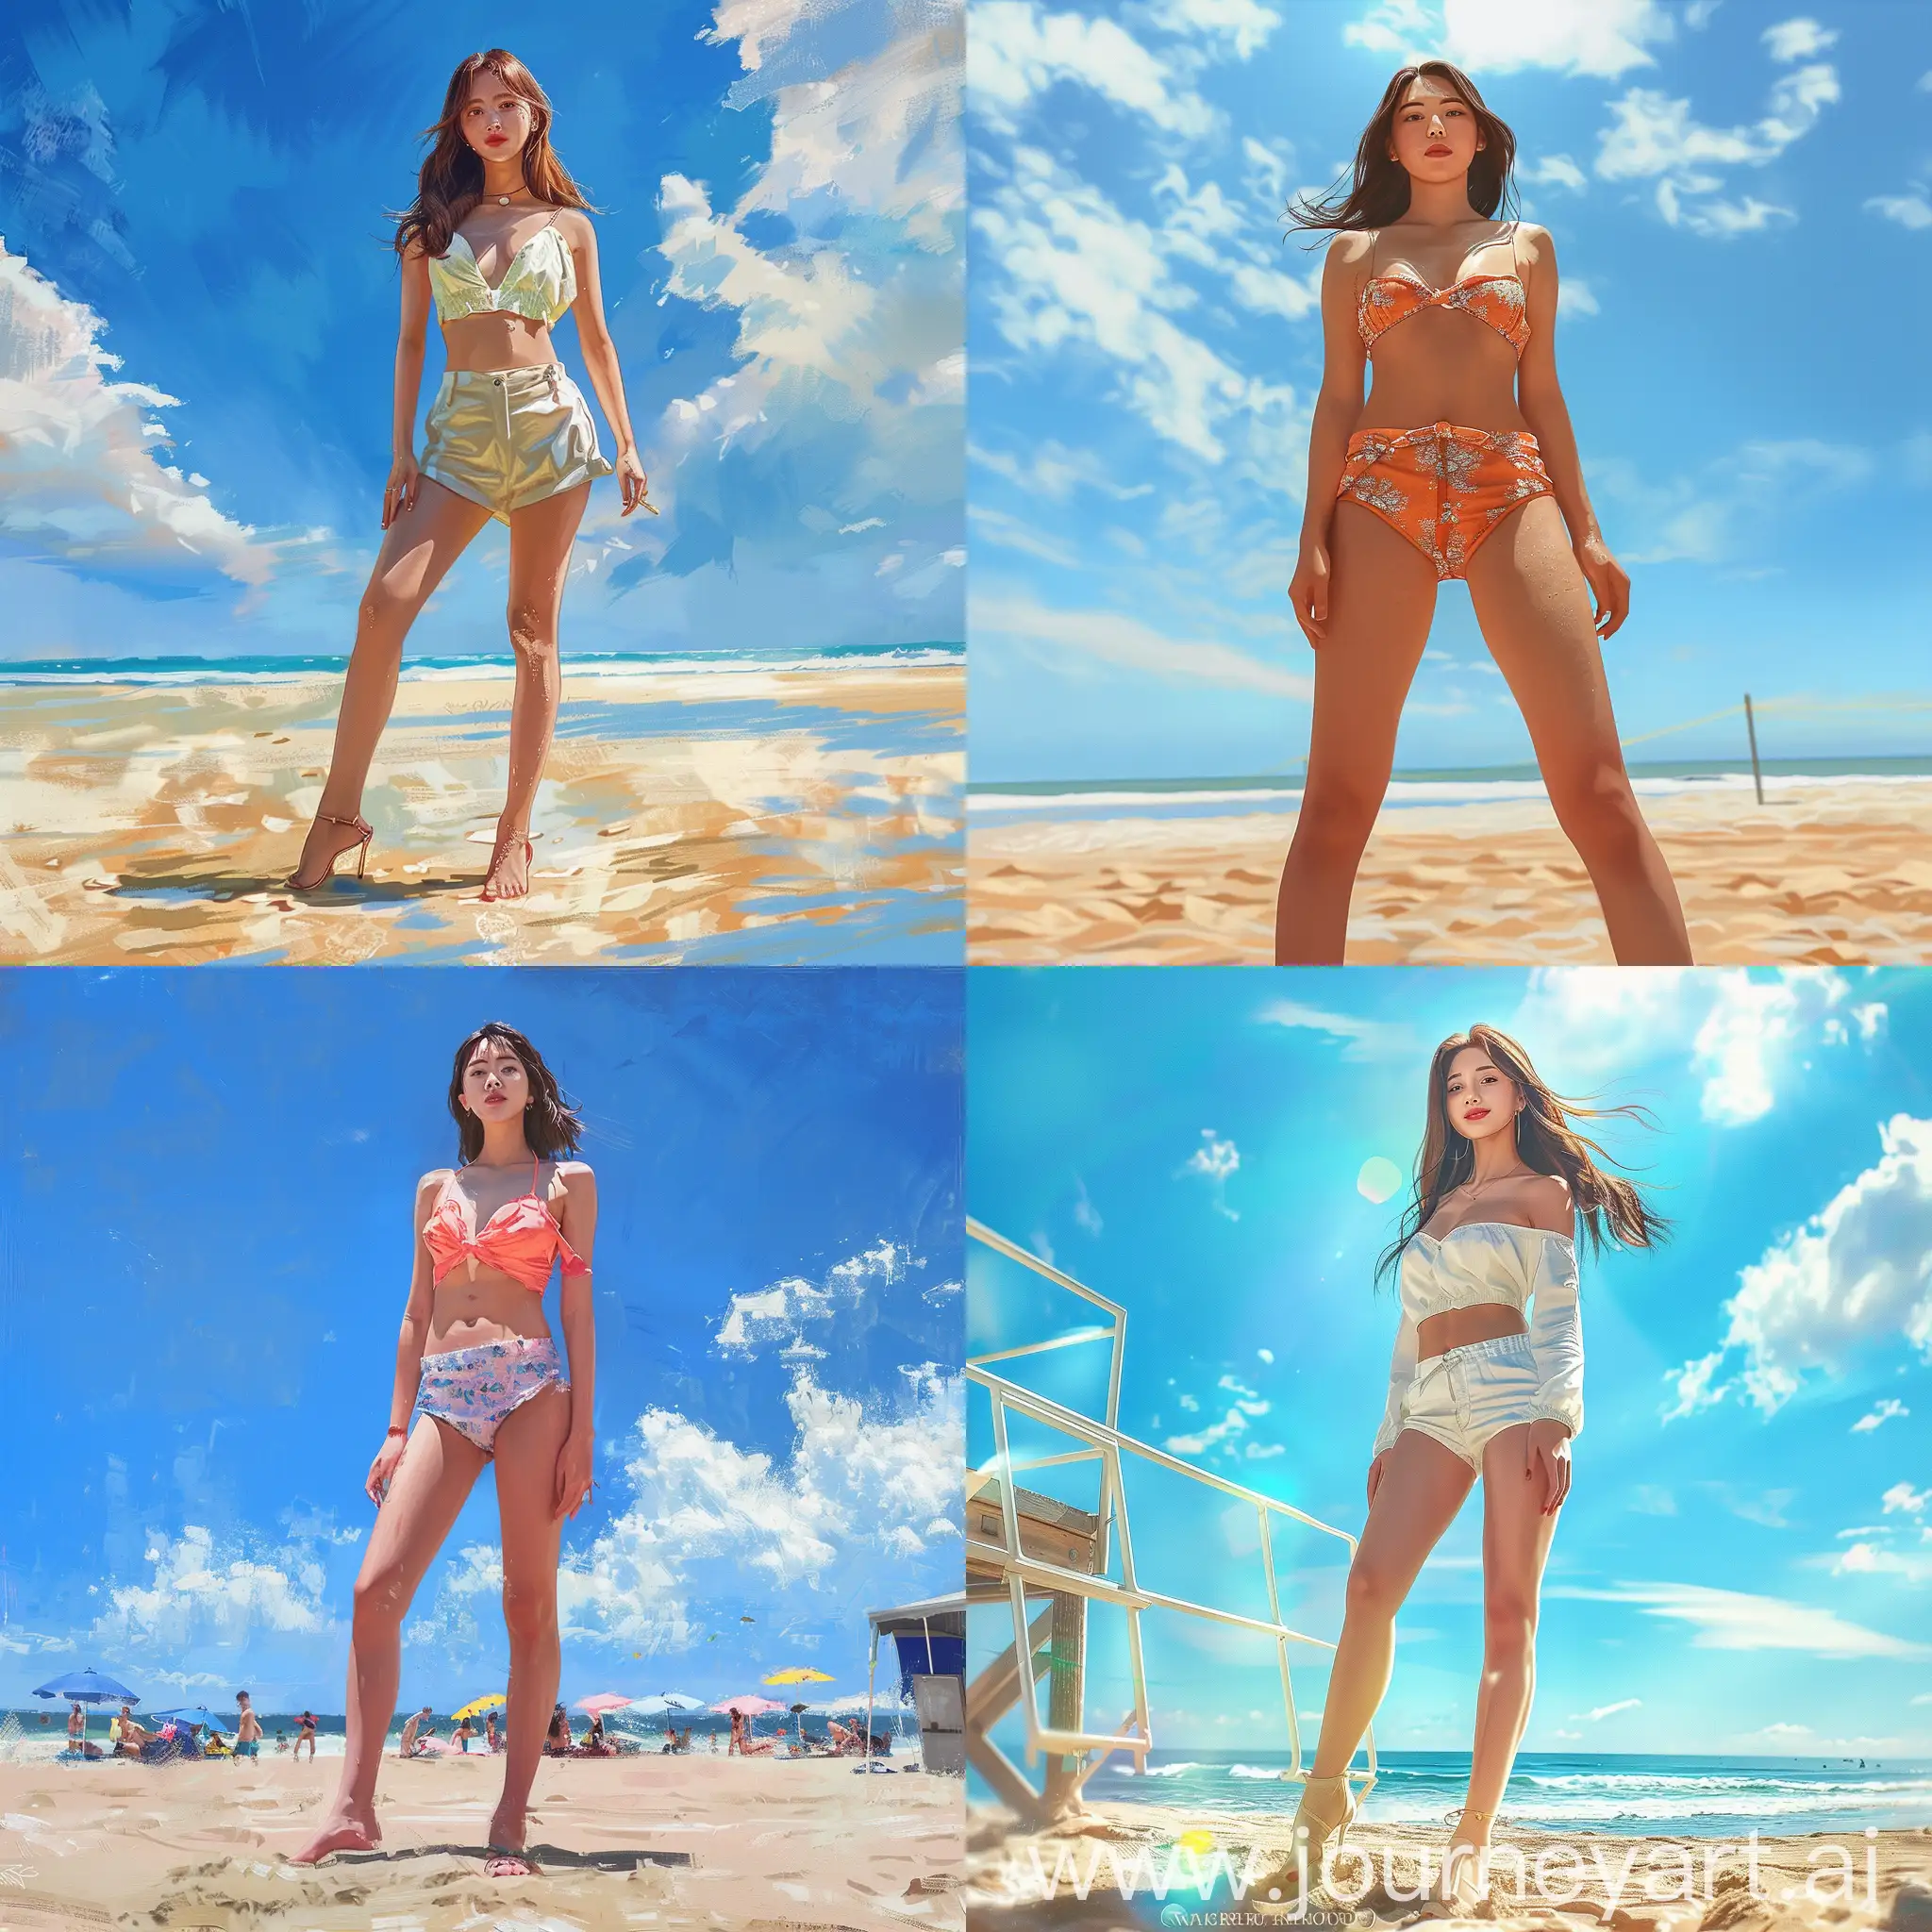 Create a realistic portrait of a stylish Korean woman at a sunny beach setting. She stands gracefully, embodying both elegance and confidence, with a focus on her fashionable beachwear that tastefully highlights her long legs. Her pose is playful and charming, capturing a moment of flirtatious fun, while her expression is inviting and teasing, perfectly balanced between sophistication and playfulness. The background is vibrant, filled with the serene beauty of the beach, the blue sky above, and the bright, warm sunlight that enhances the overall cheerful and lively atmosphere. The scene should exude a sense of joy and the natural beauty of a day at the beach, emphasizing the model's connection with the environment in a harmonious and aesthetically pleasing manner.